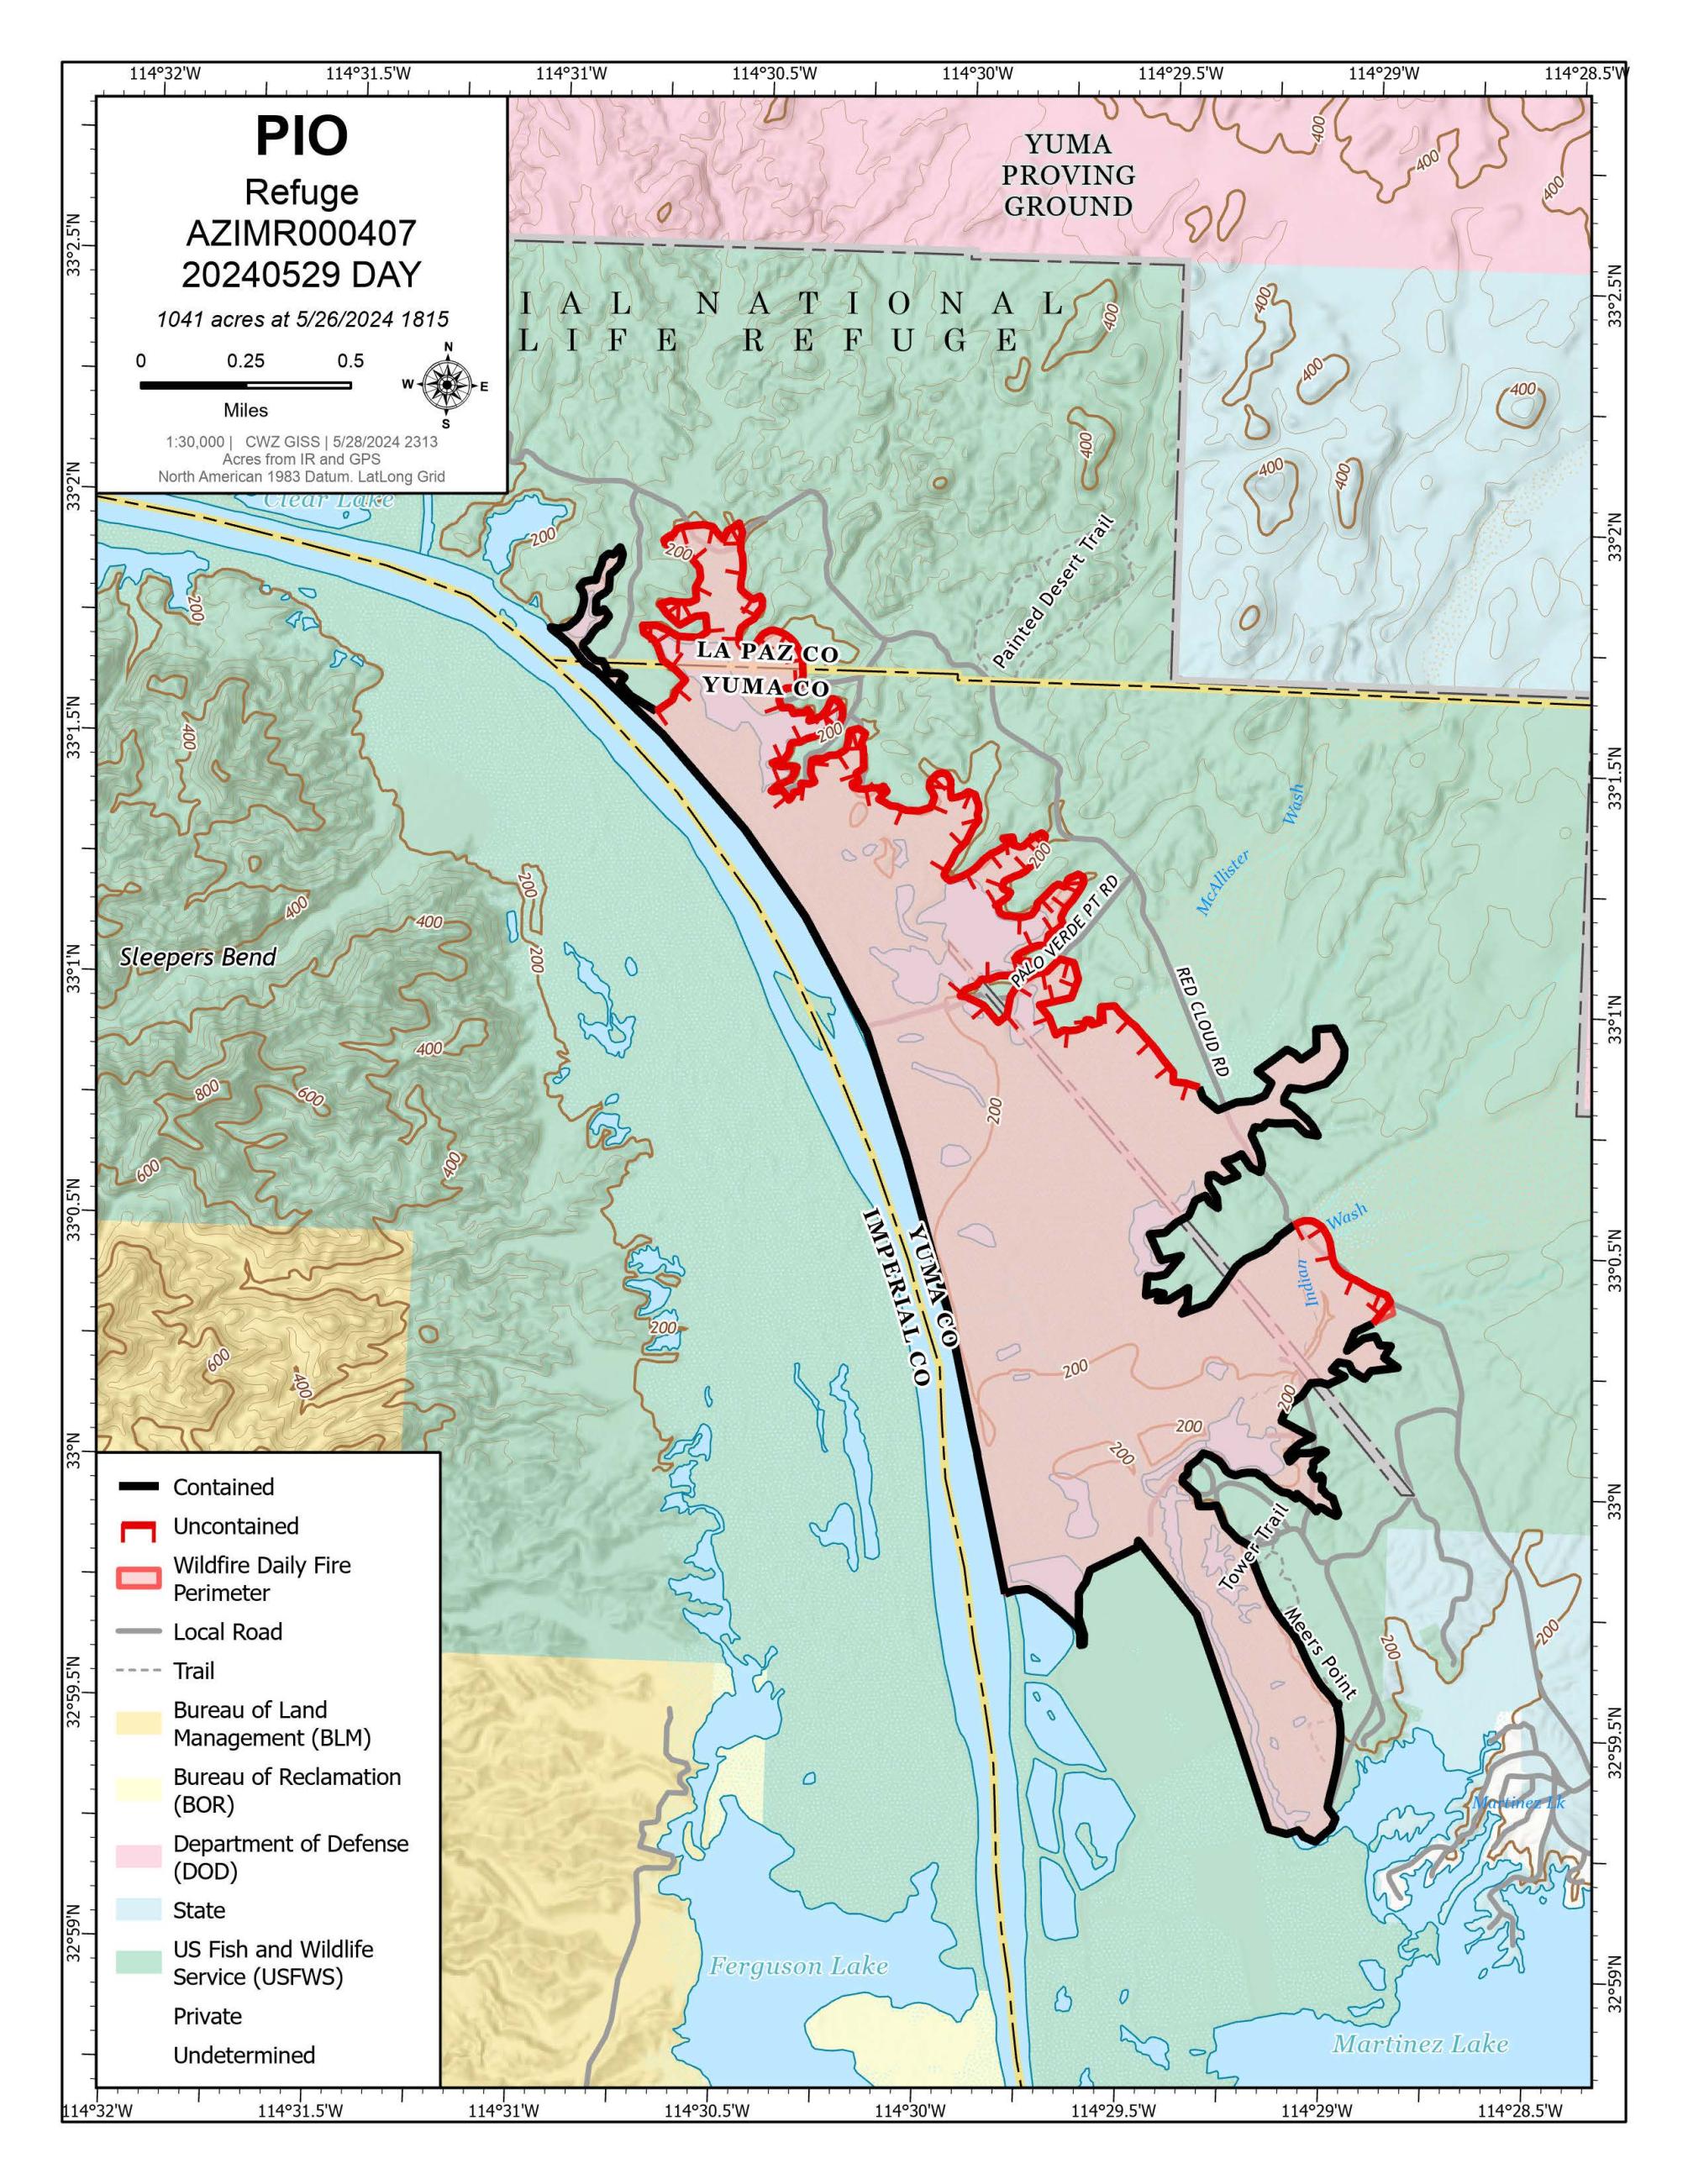 Map showing the fire area and containment lines